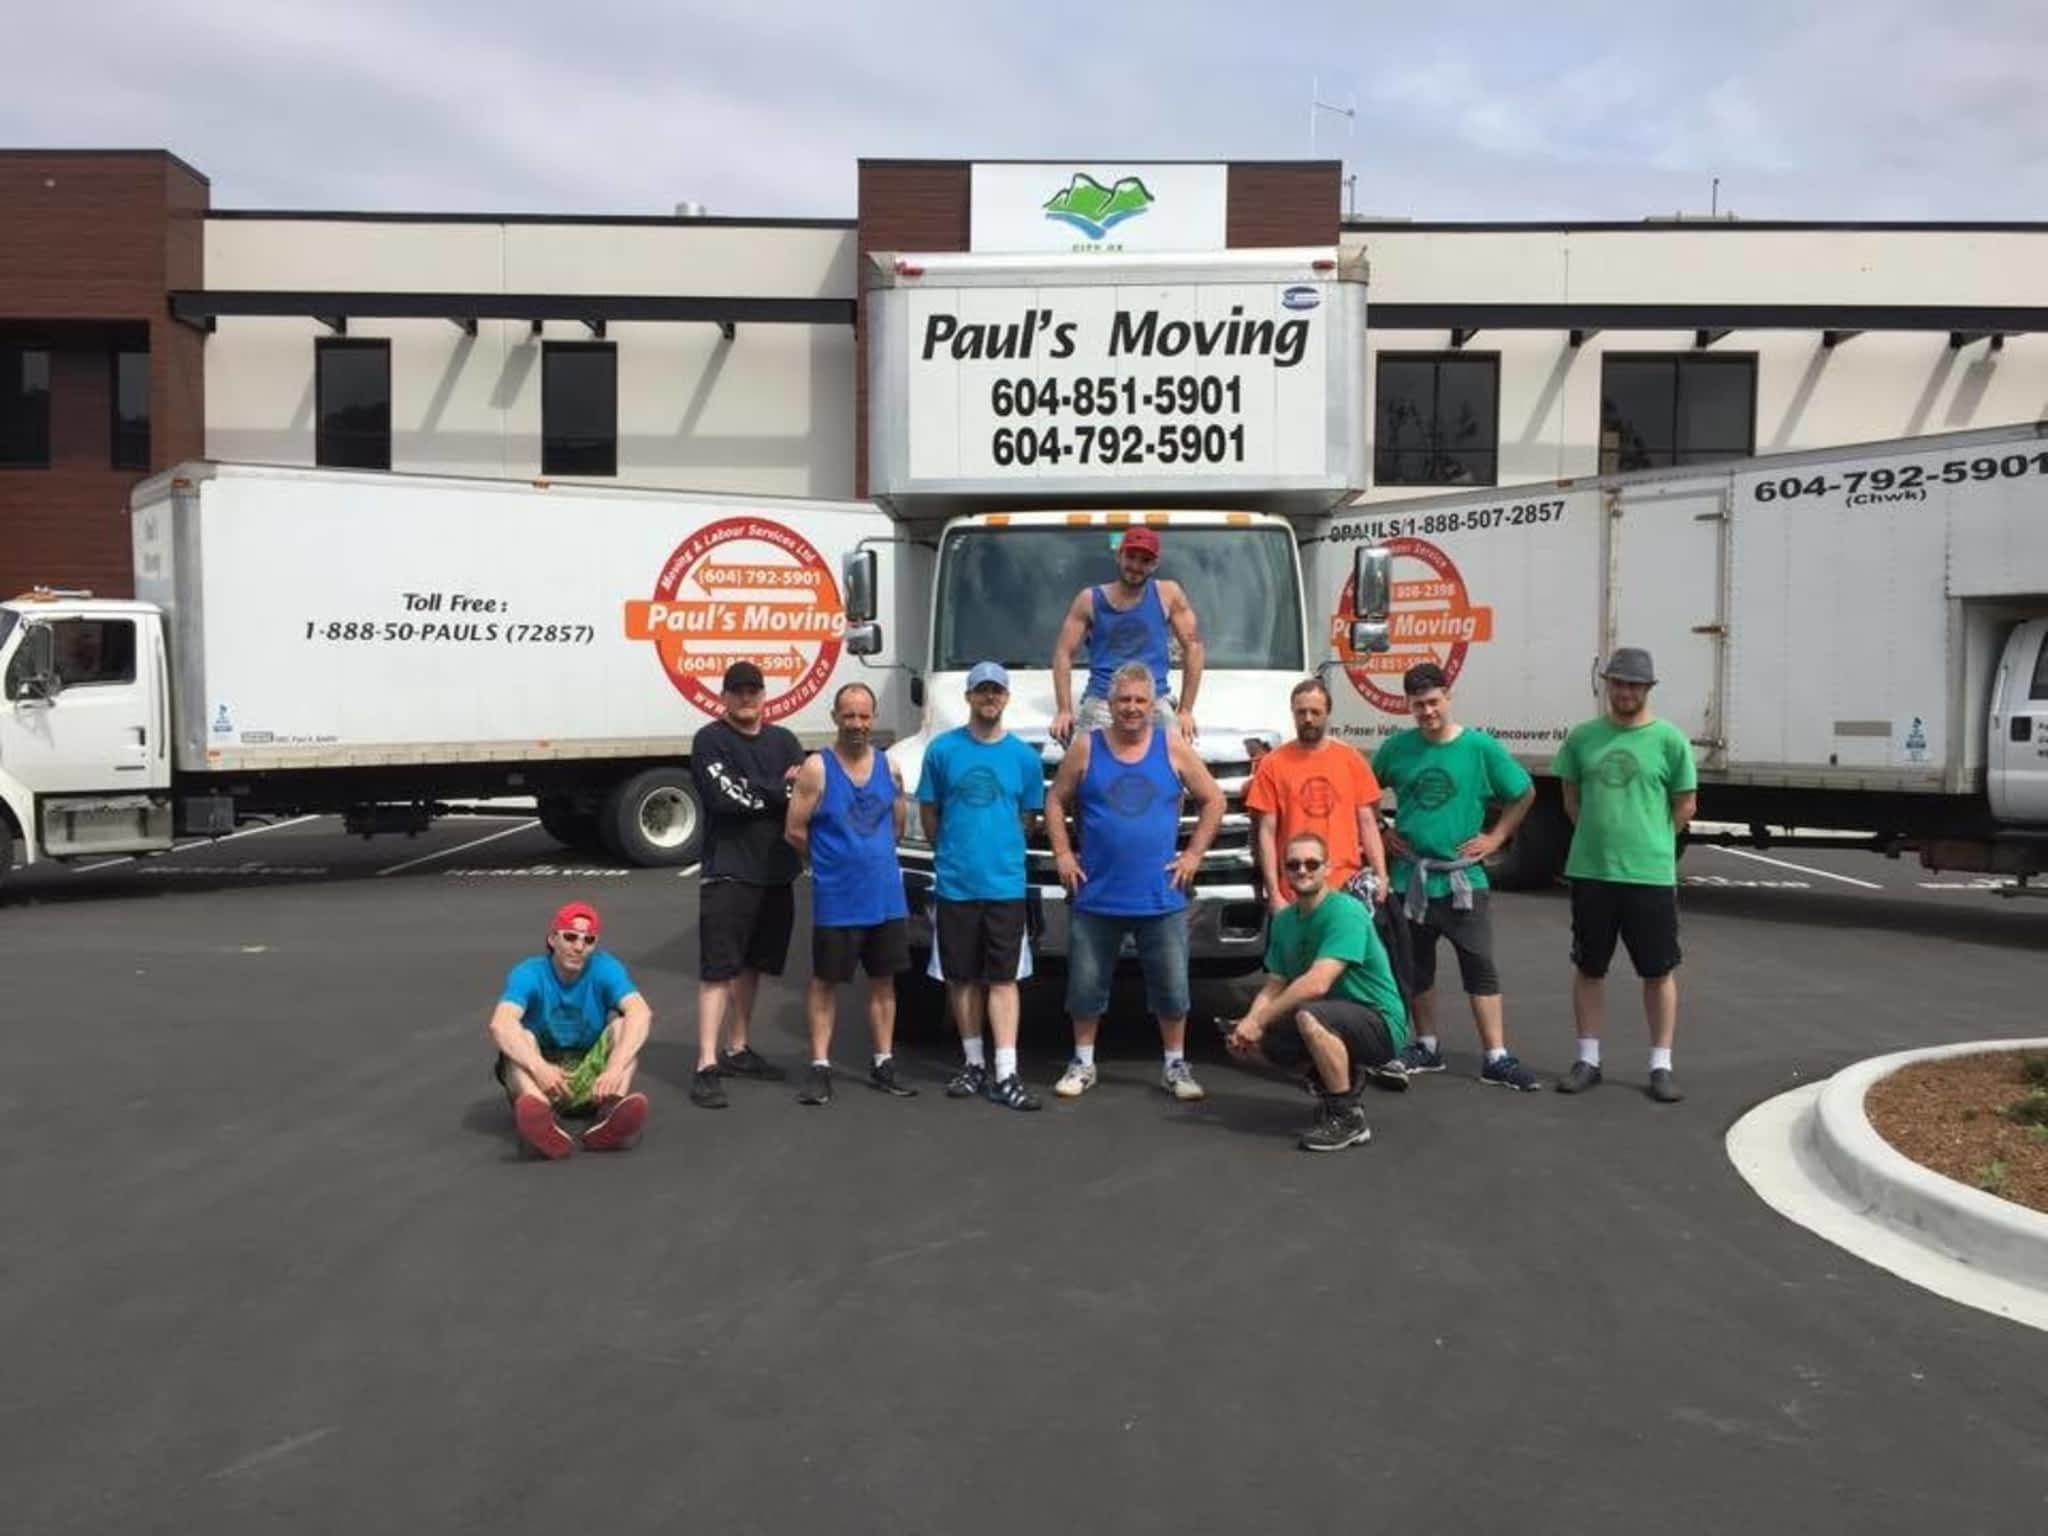 photo Paul's Moving and Labour Services LTD.